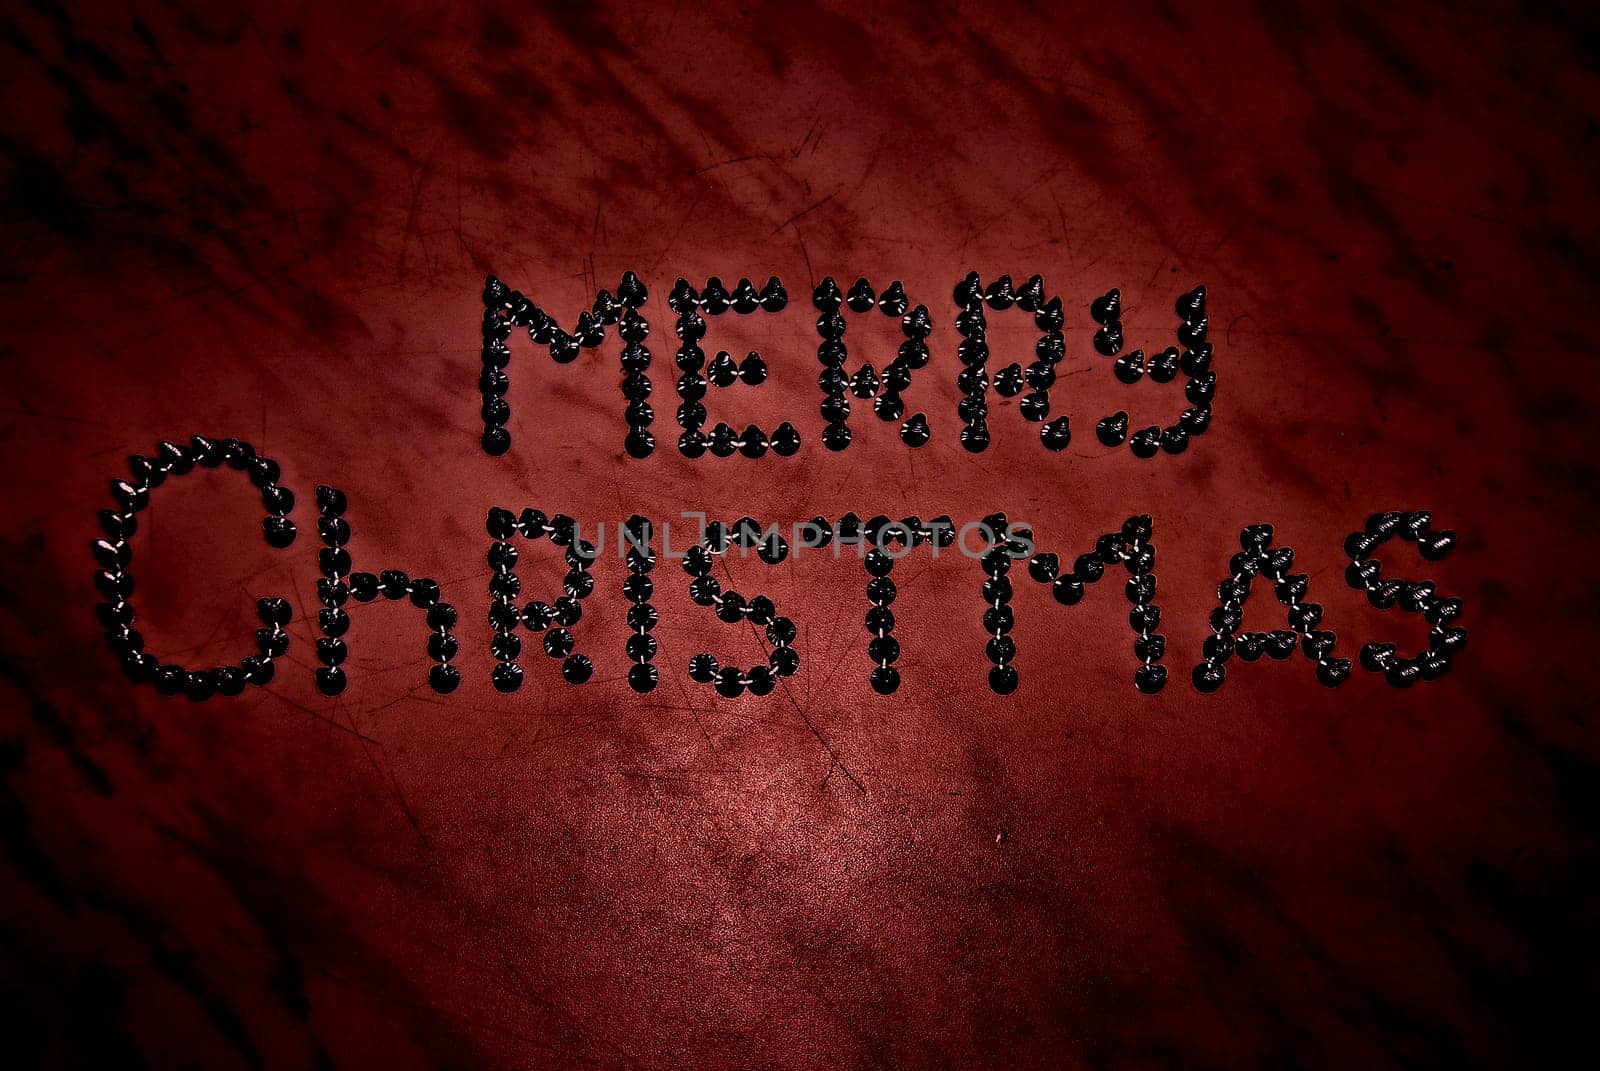 Greeting inscription "Merry Christmas" by Inoxodec